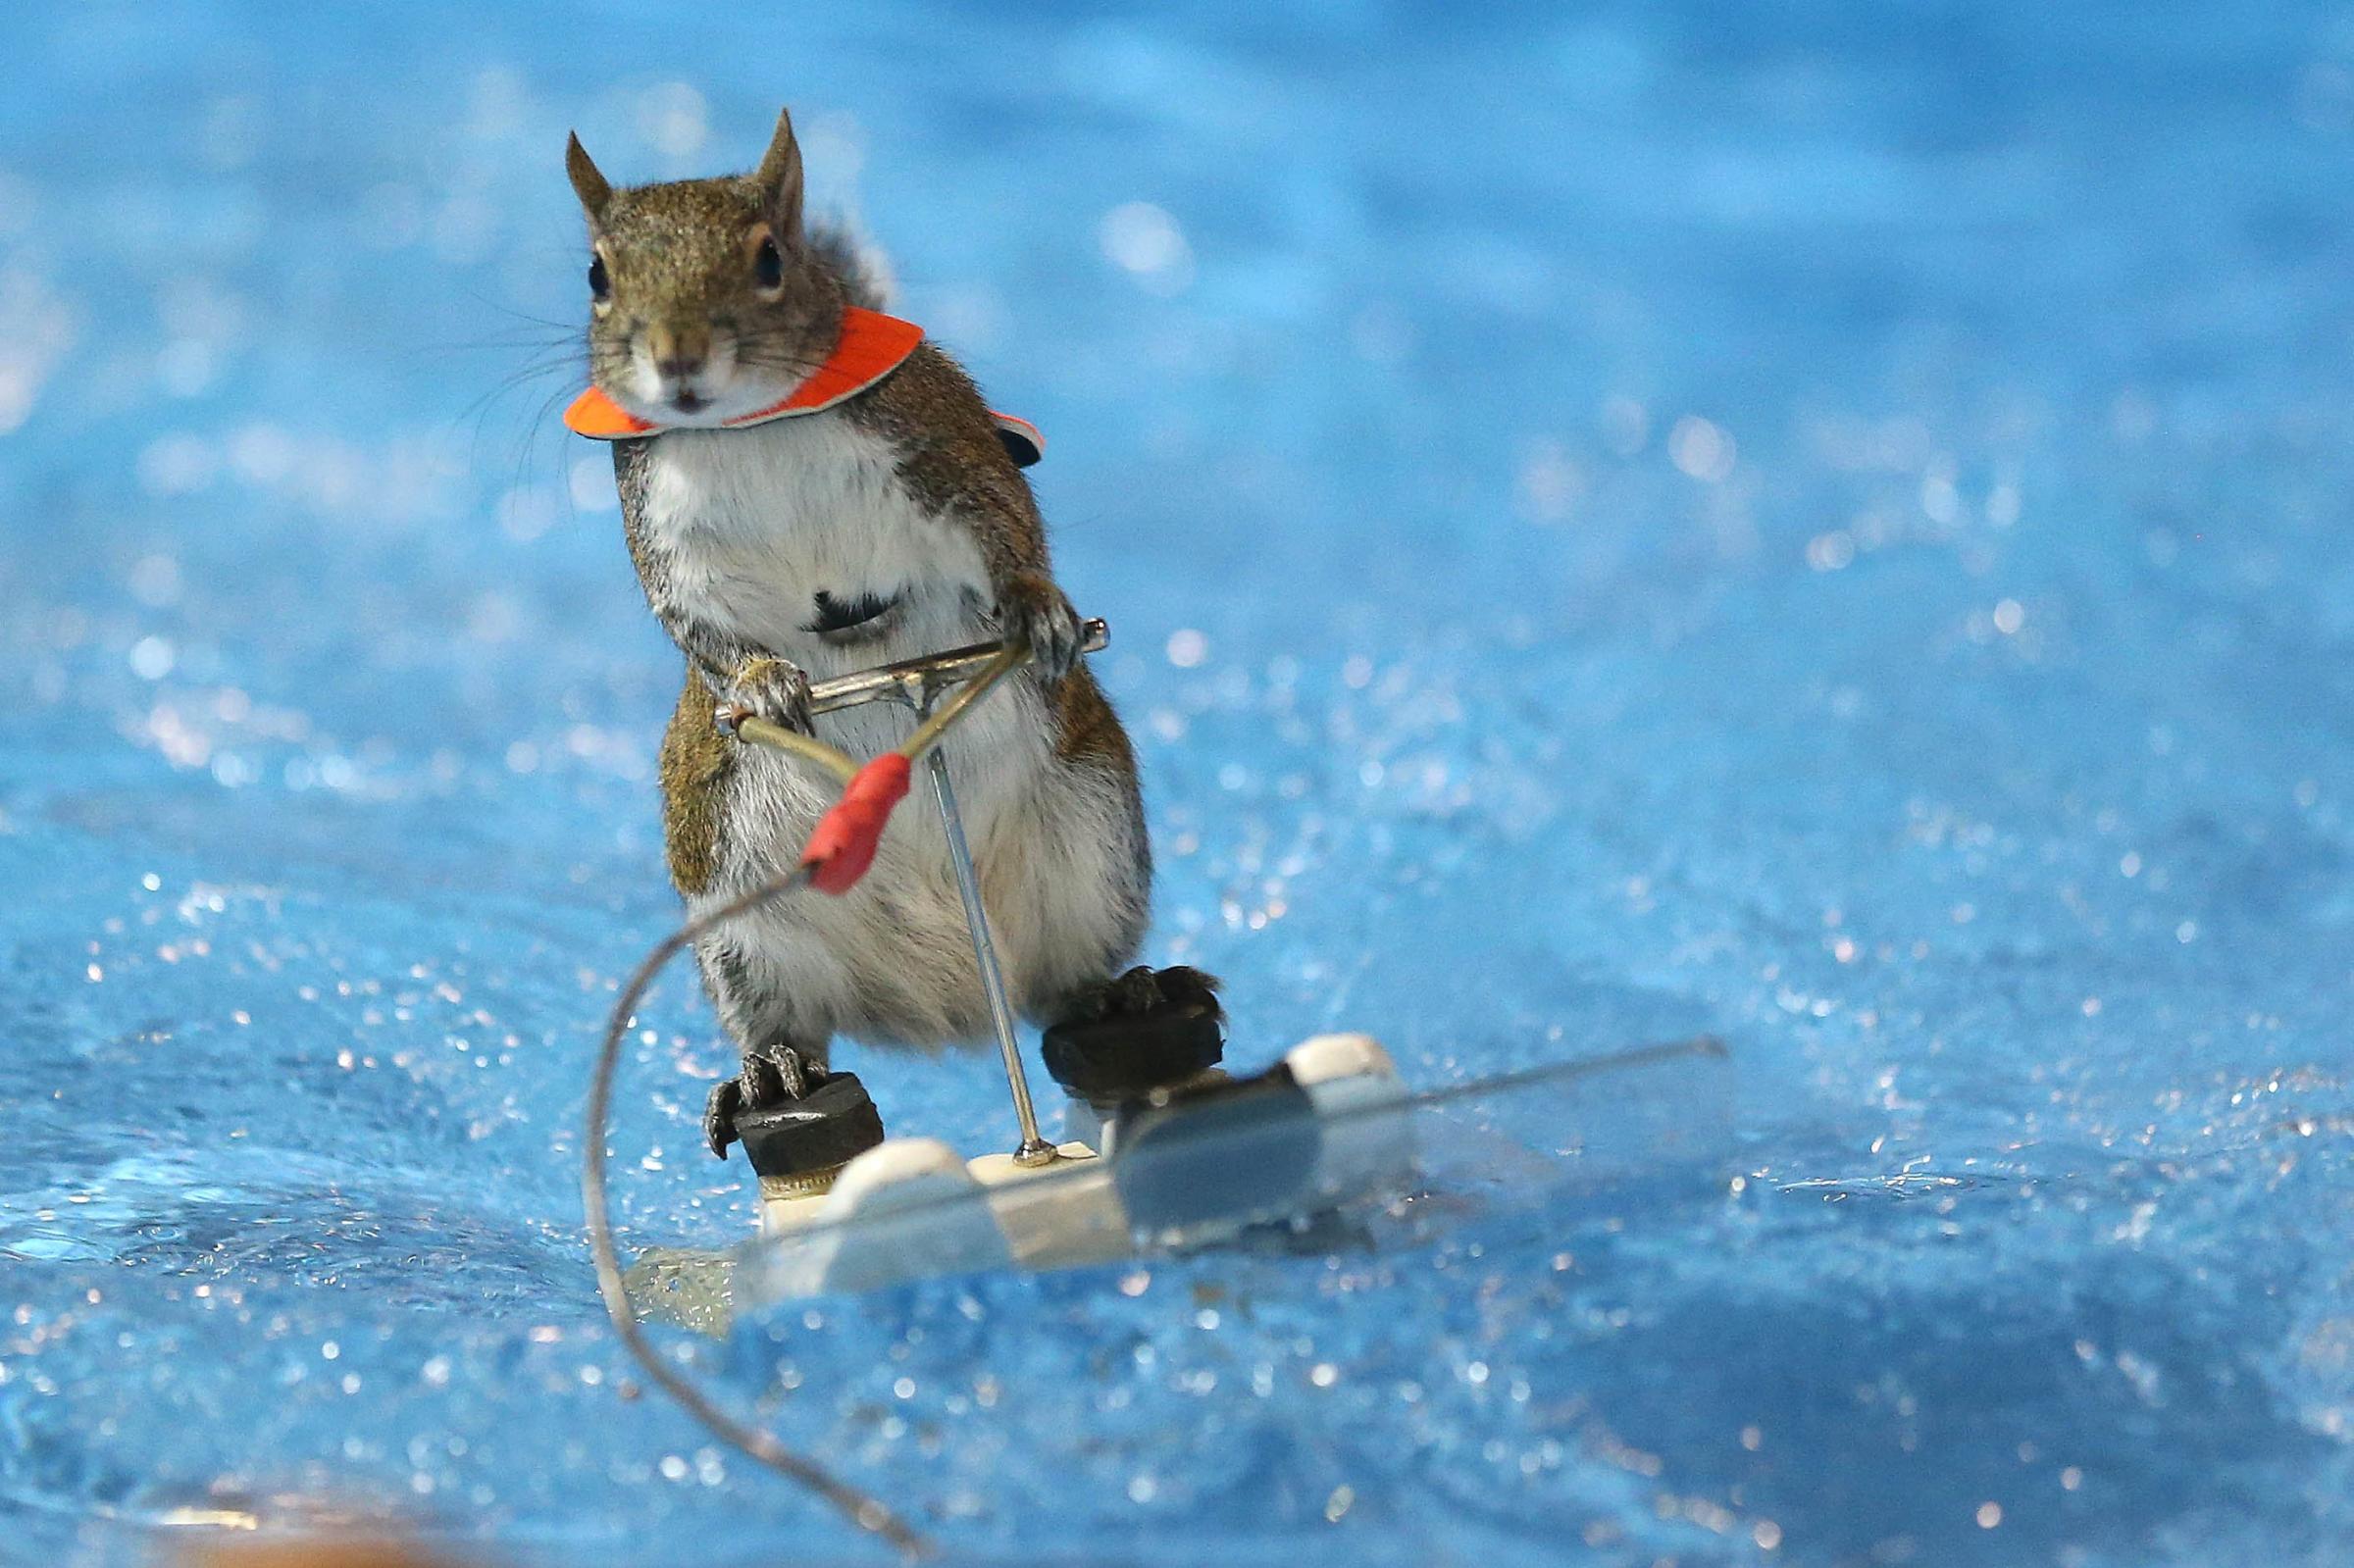 Twiggy the Water Skiing Squirrel gets in some practice runs before her shows at the Toronto International Boat Show in Toronto, Canada, on Jan. 7, 2016.